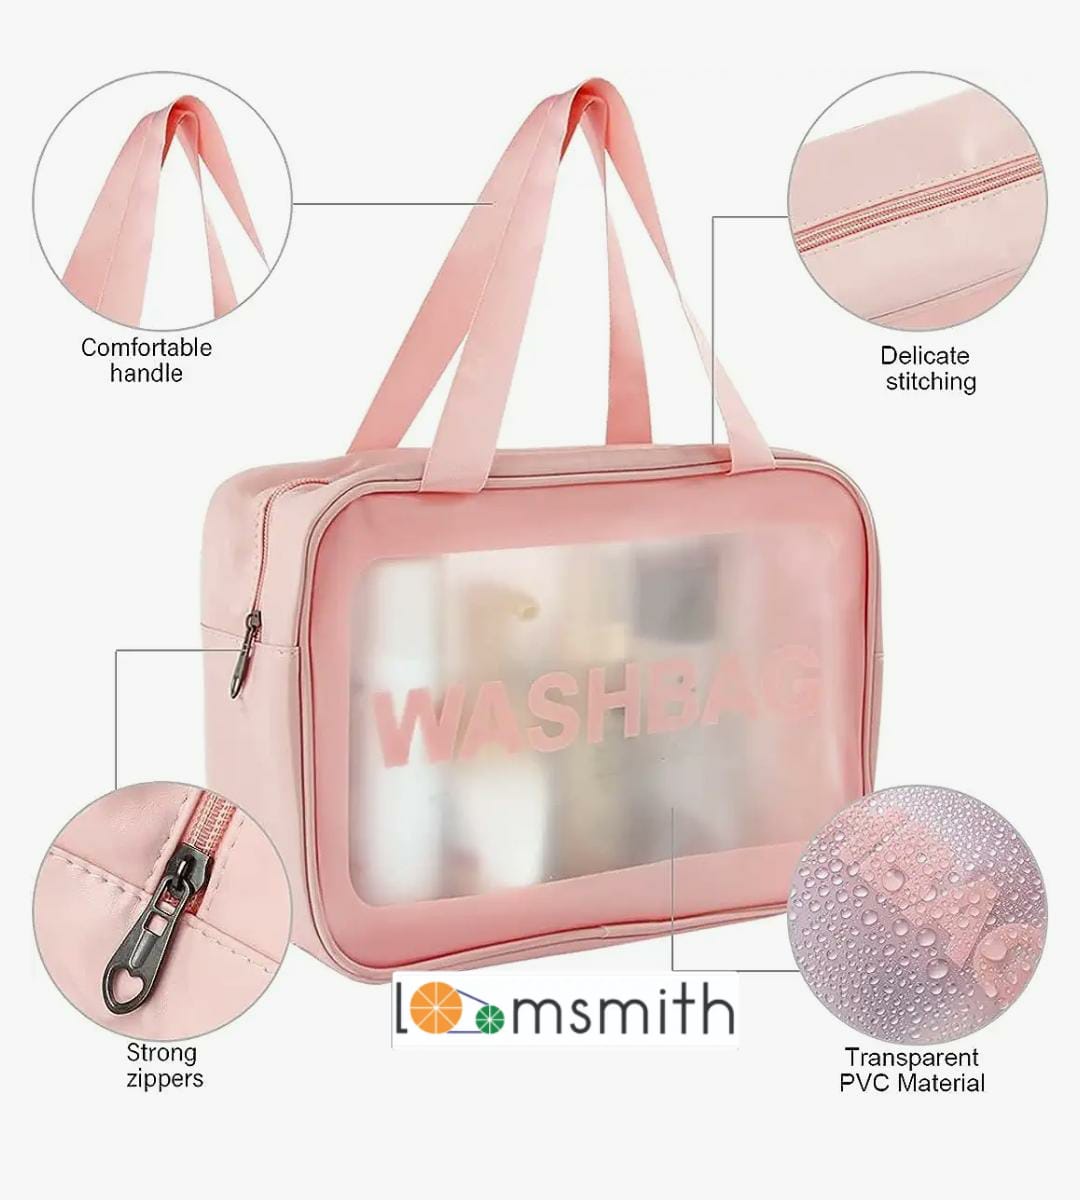 Introducing-Cosmetic-Bag-for-Travel-set-3-peach-color 